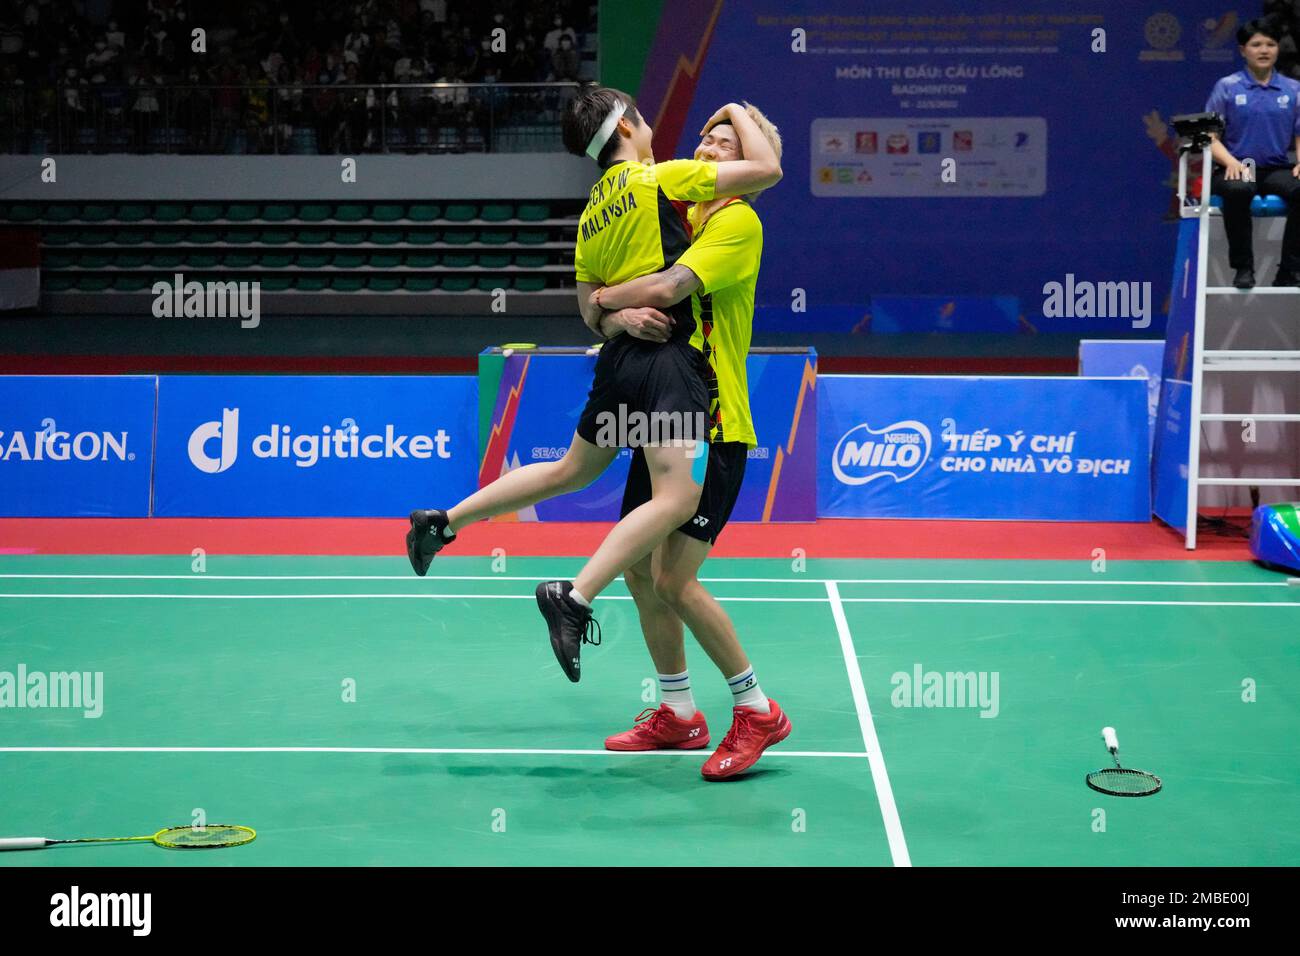 Malaysias Chen Tang Jie, right, and Peck Yen Wei celebrate after defeating their compatriots Hoo Pang Ron and Cheah Yee See during their mixed doubles badminton final match at the 31st Southeast